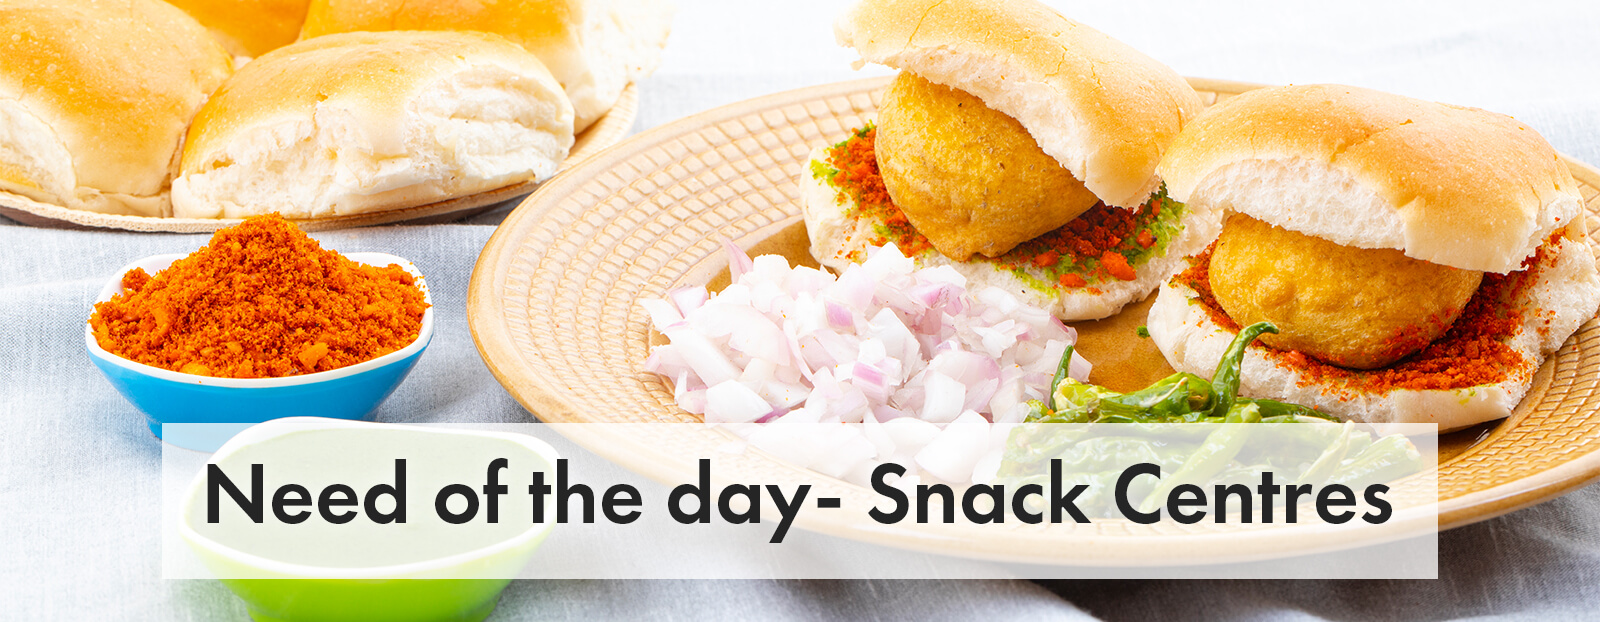 Need of the day – Snack Centres